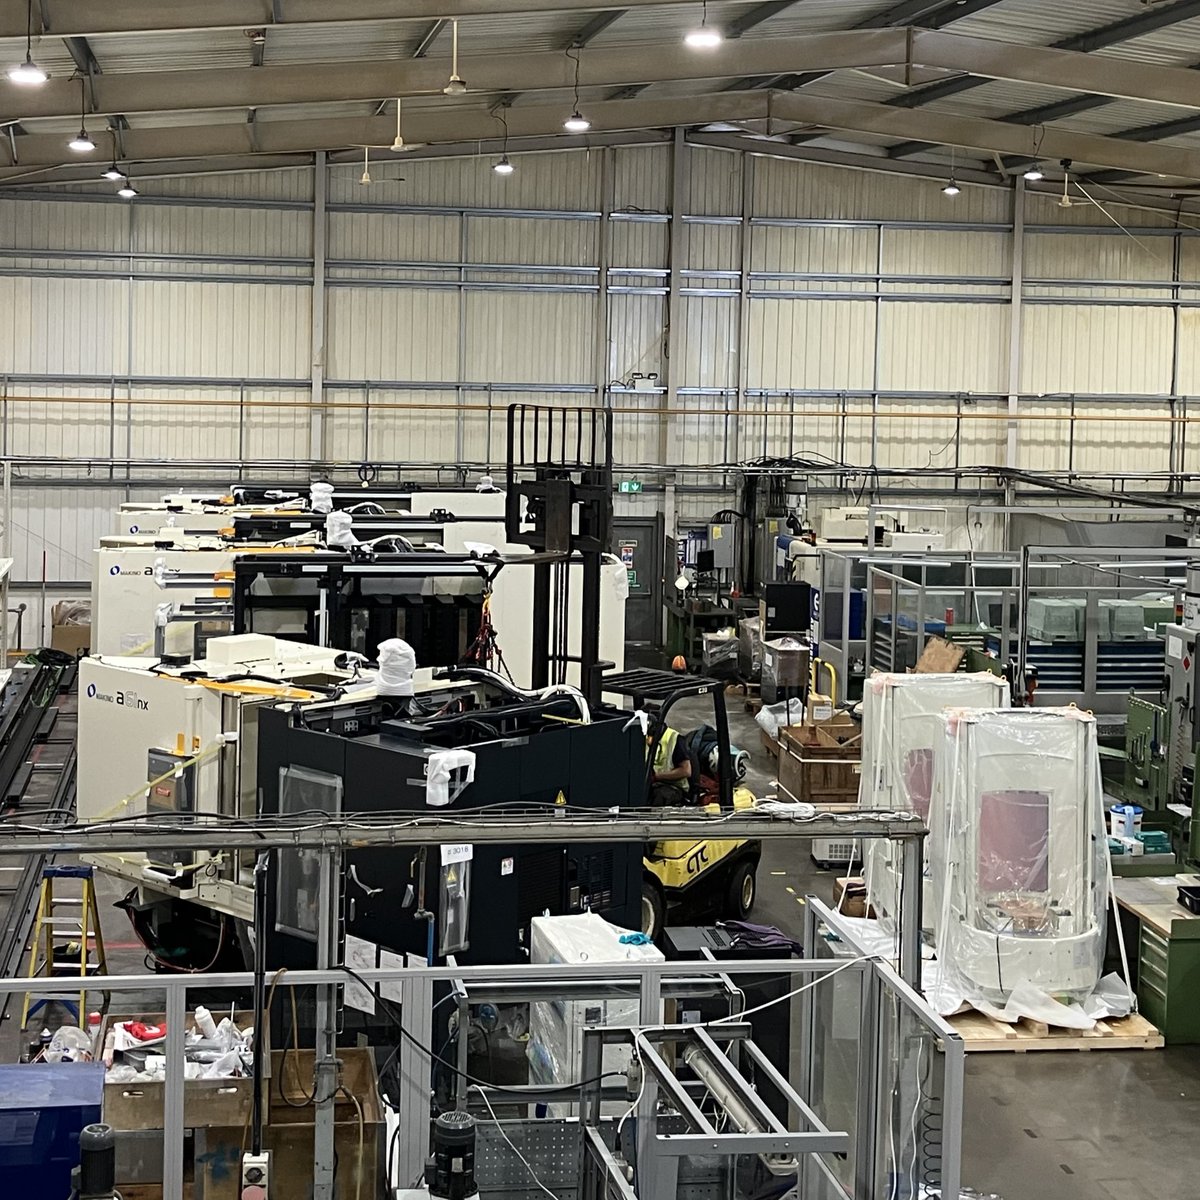 Progress Report at @DanfossPower  👏
Machine One ✅
Machine Two ✅
Machine Three ✅
PZ1 Pallet Transfer System 🔃

Now time to get it connected🔌

#ncmt #makino @MAKINO_Europe @CtceuropeC 
#cncmachining #ukmfg #manufacturing #automation  #cnc #shoutaboutukmfg #installation